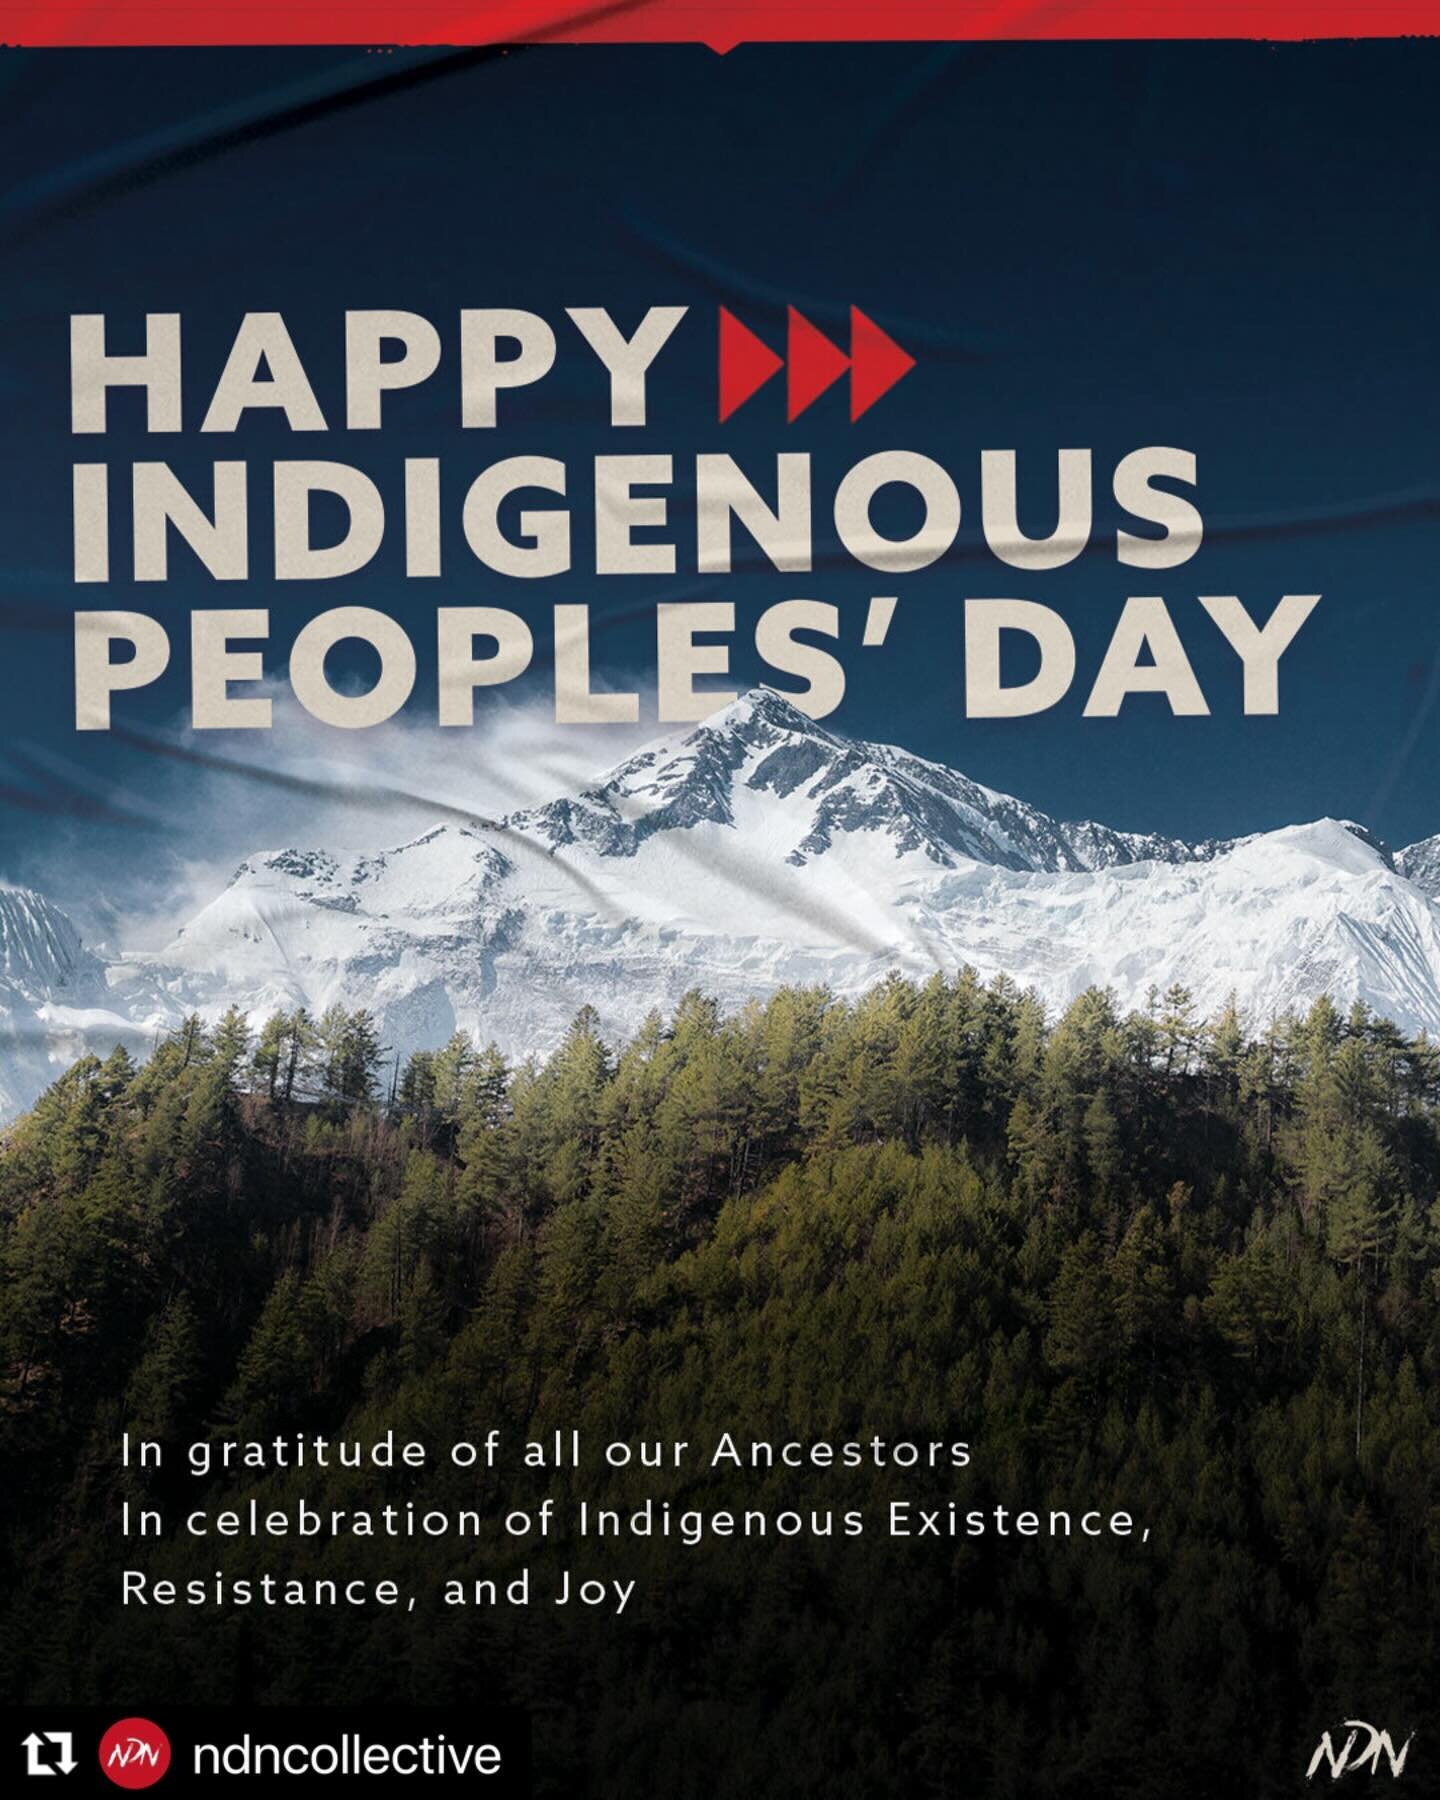 Happy Indigenous Peoples' Day

#Repost @ndncollective 
・・・
In celebration of Indigenous Peoples&rsquo; Day, we offer gratitude to our lineages, uplifting the resilience of our Ancestors and the paths of resistance they forged in preparation for us. B